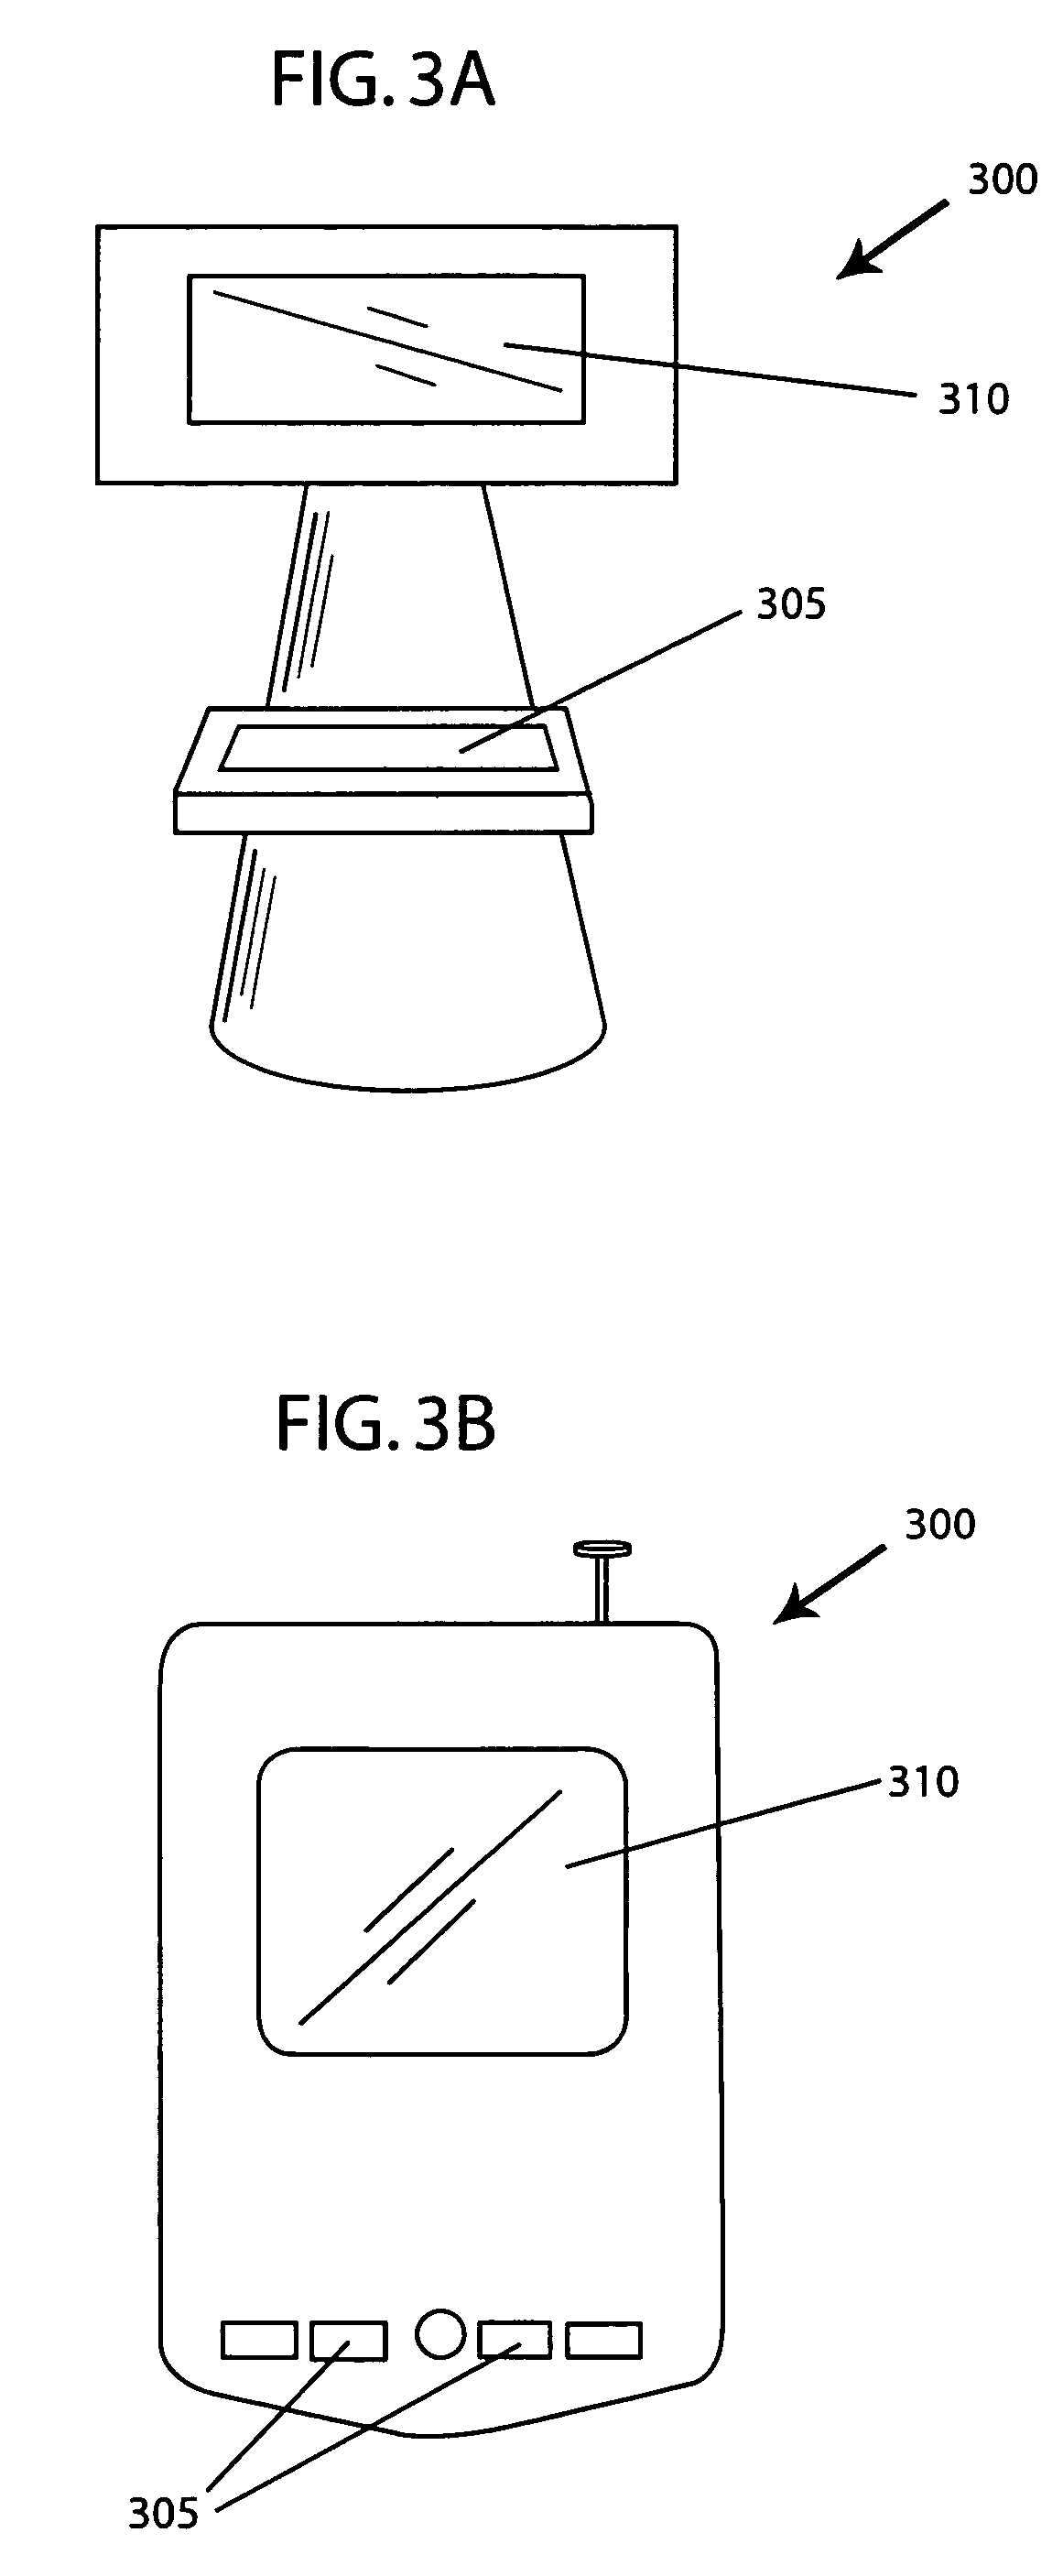 Method of determining a flight trajectory and extracting flight data for a trackable golf ball